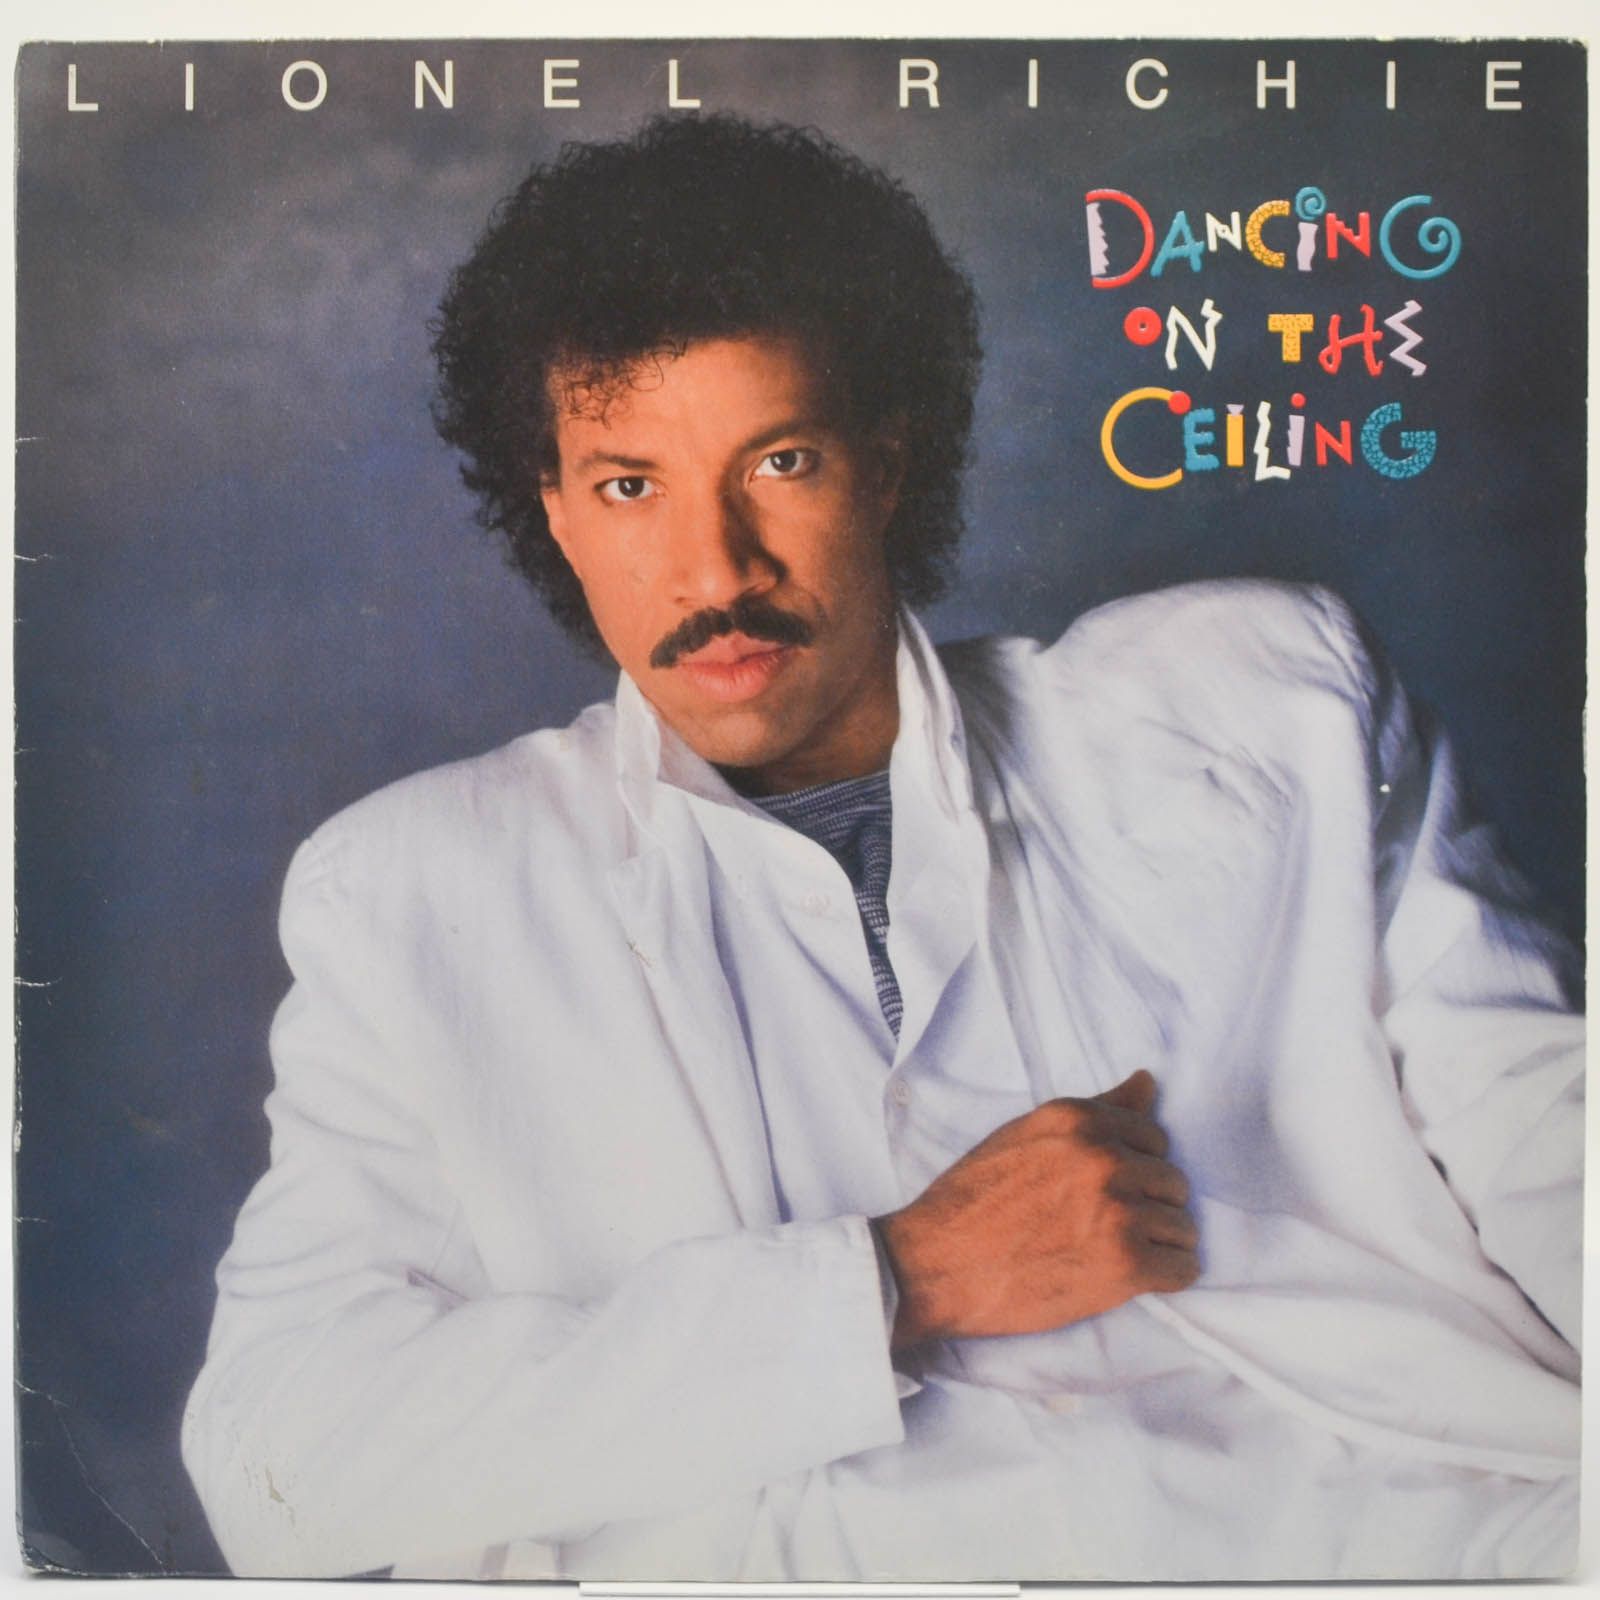 Lionel Richie — Dancing On The Ceiling, 1986